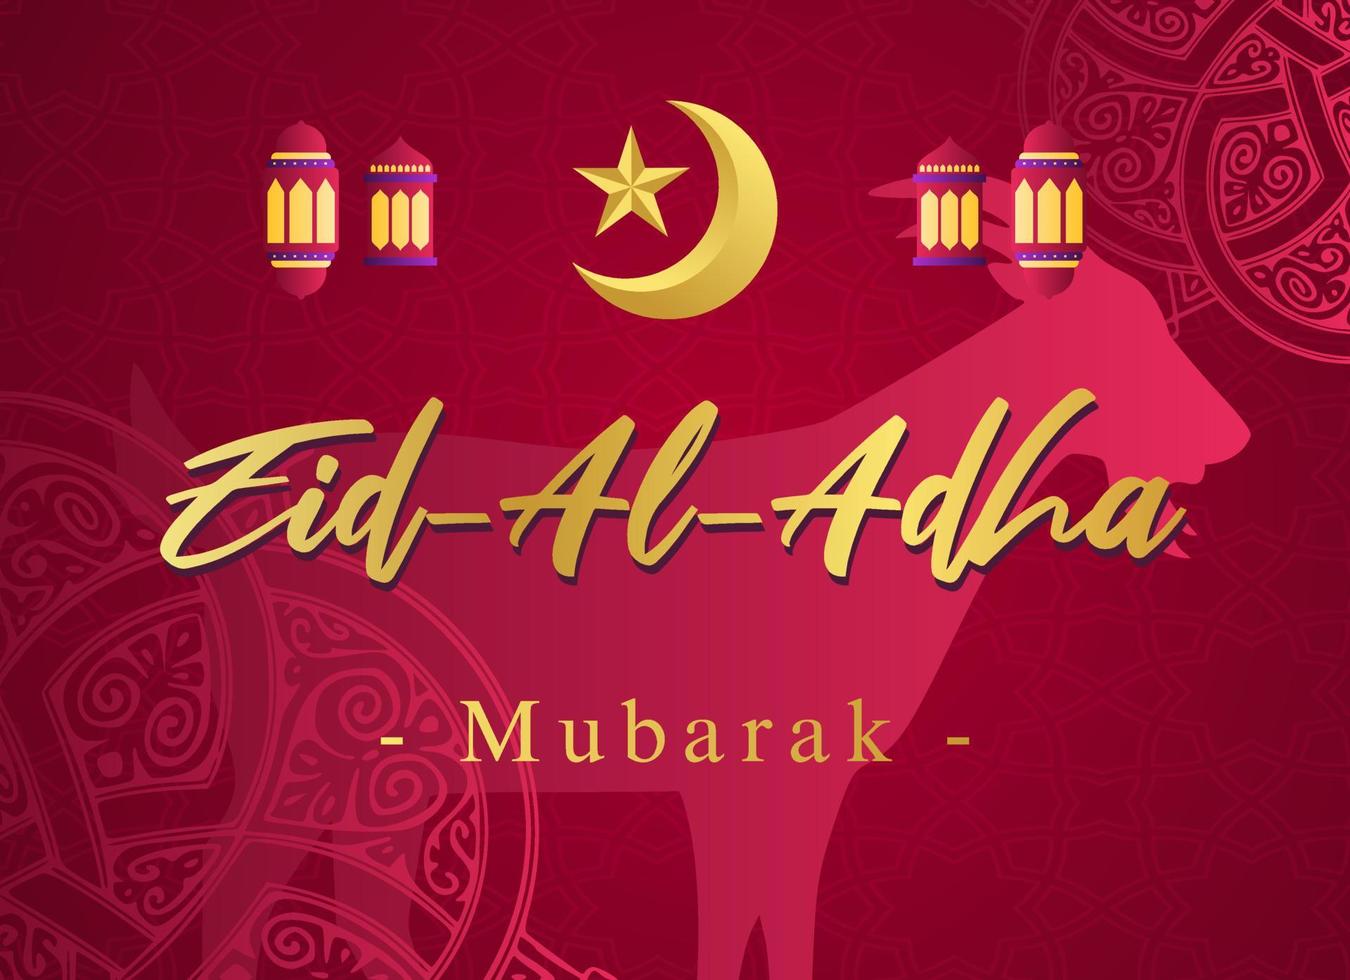 Design Vector Illustration Eid Adha Mubarak with Sketch Style complete with animal Illustration. Suitable for greeting card, poster and banner.